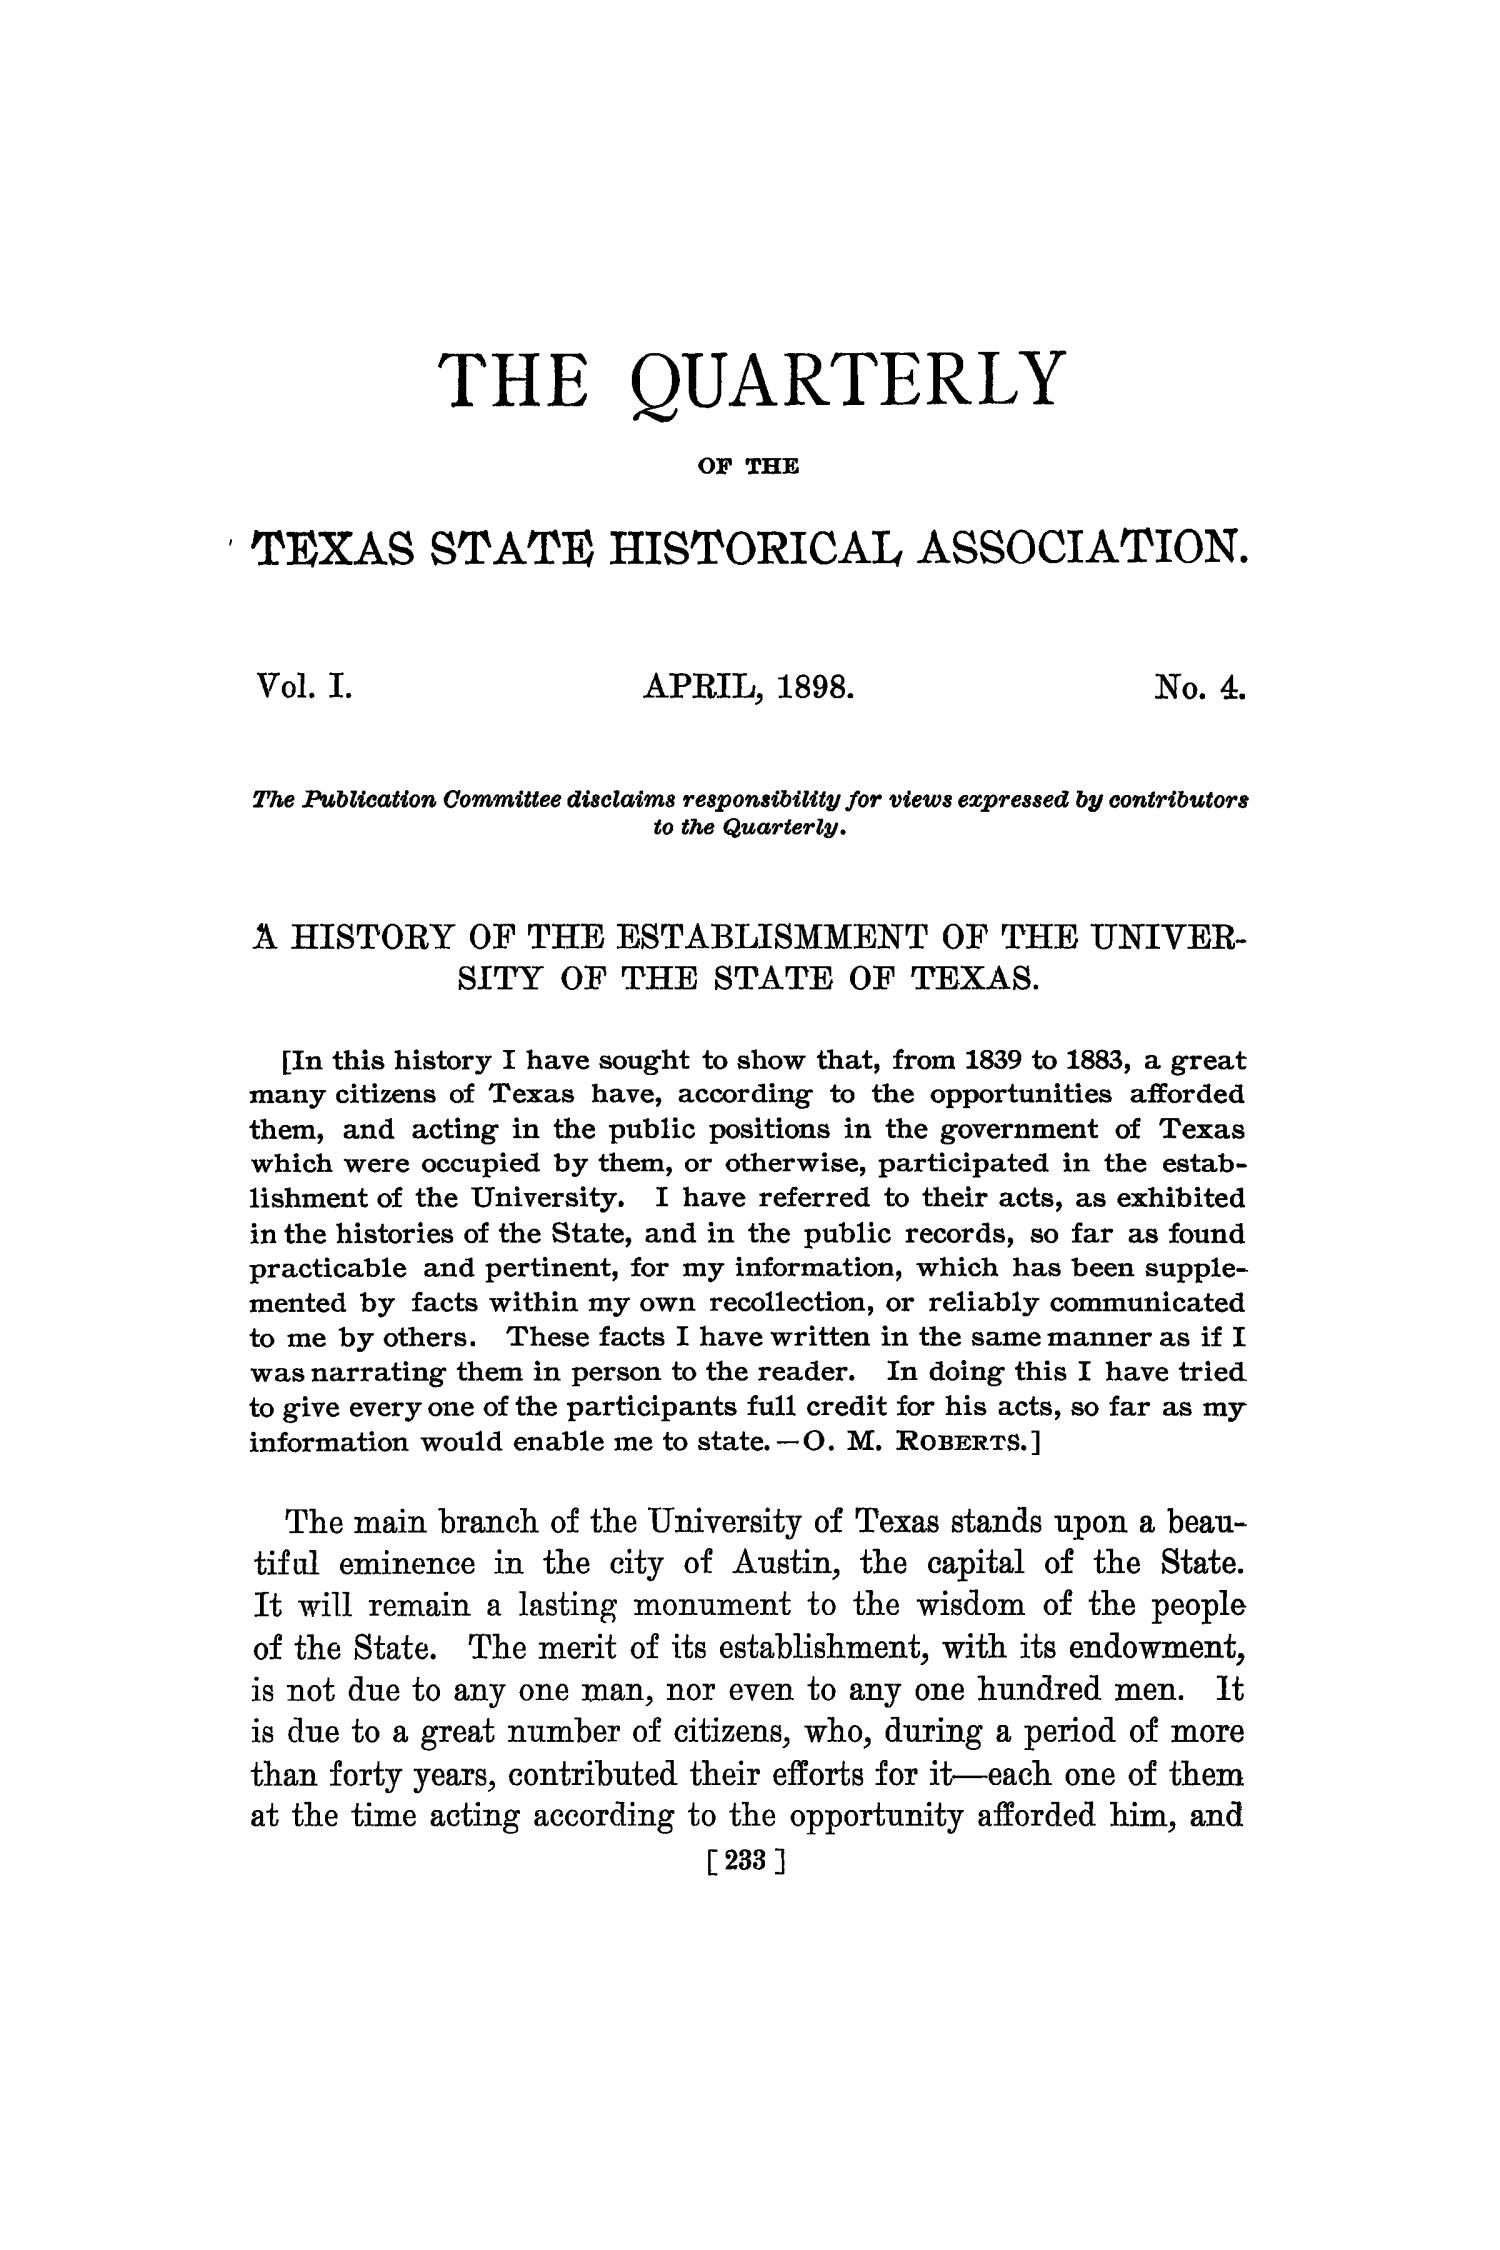 The Quarterly of the Texas State Historical Association, Volume 1, July 1897 - April, 1898
                                                
                                                    233
                                                